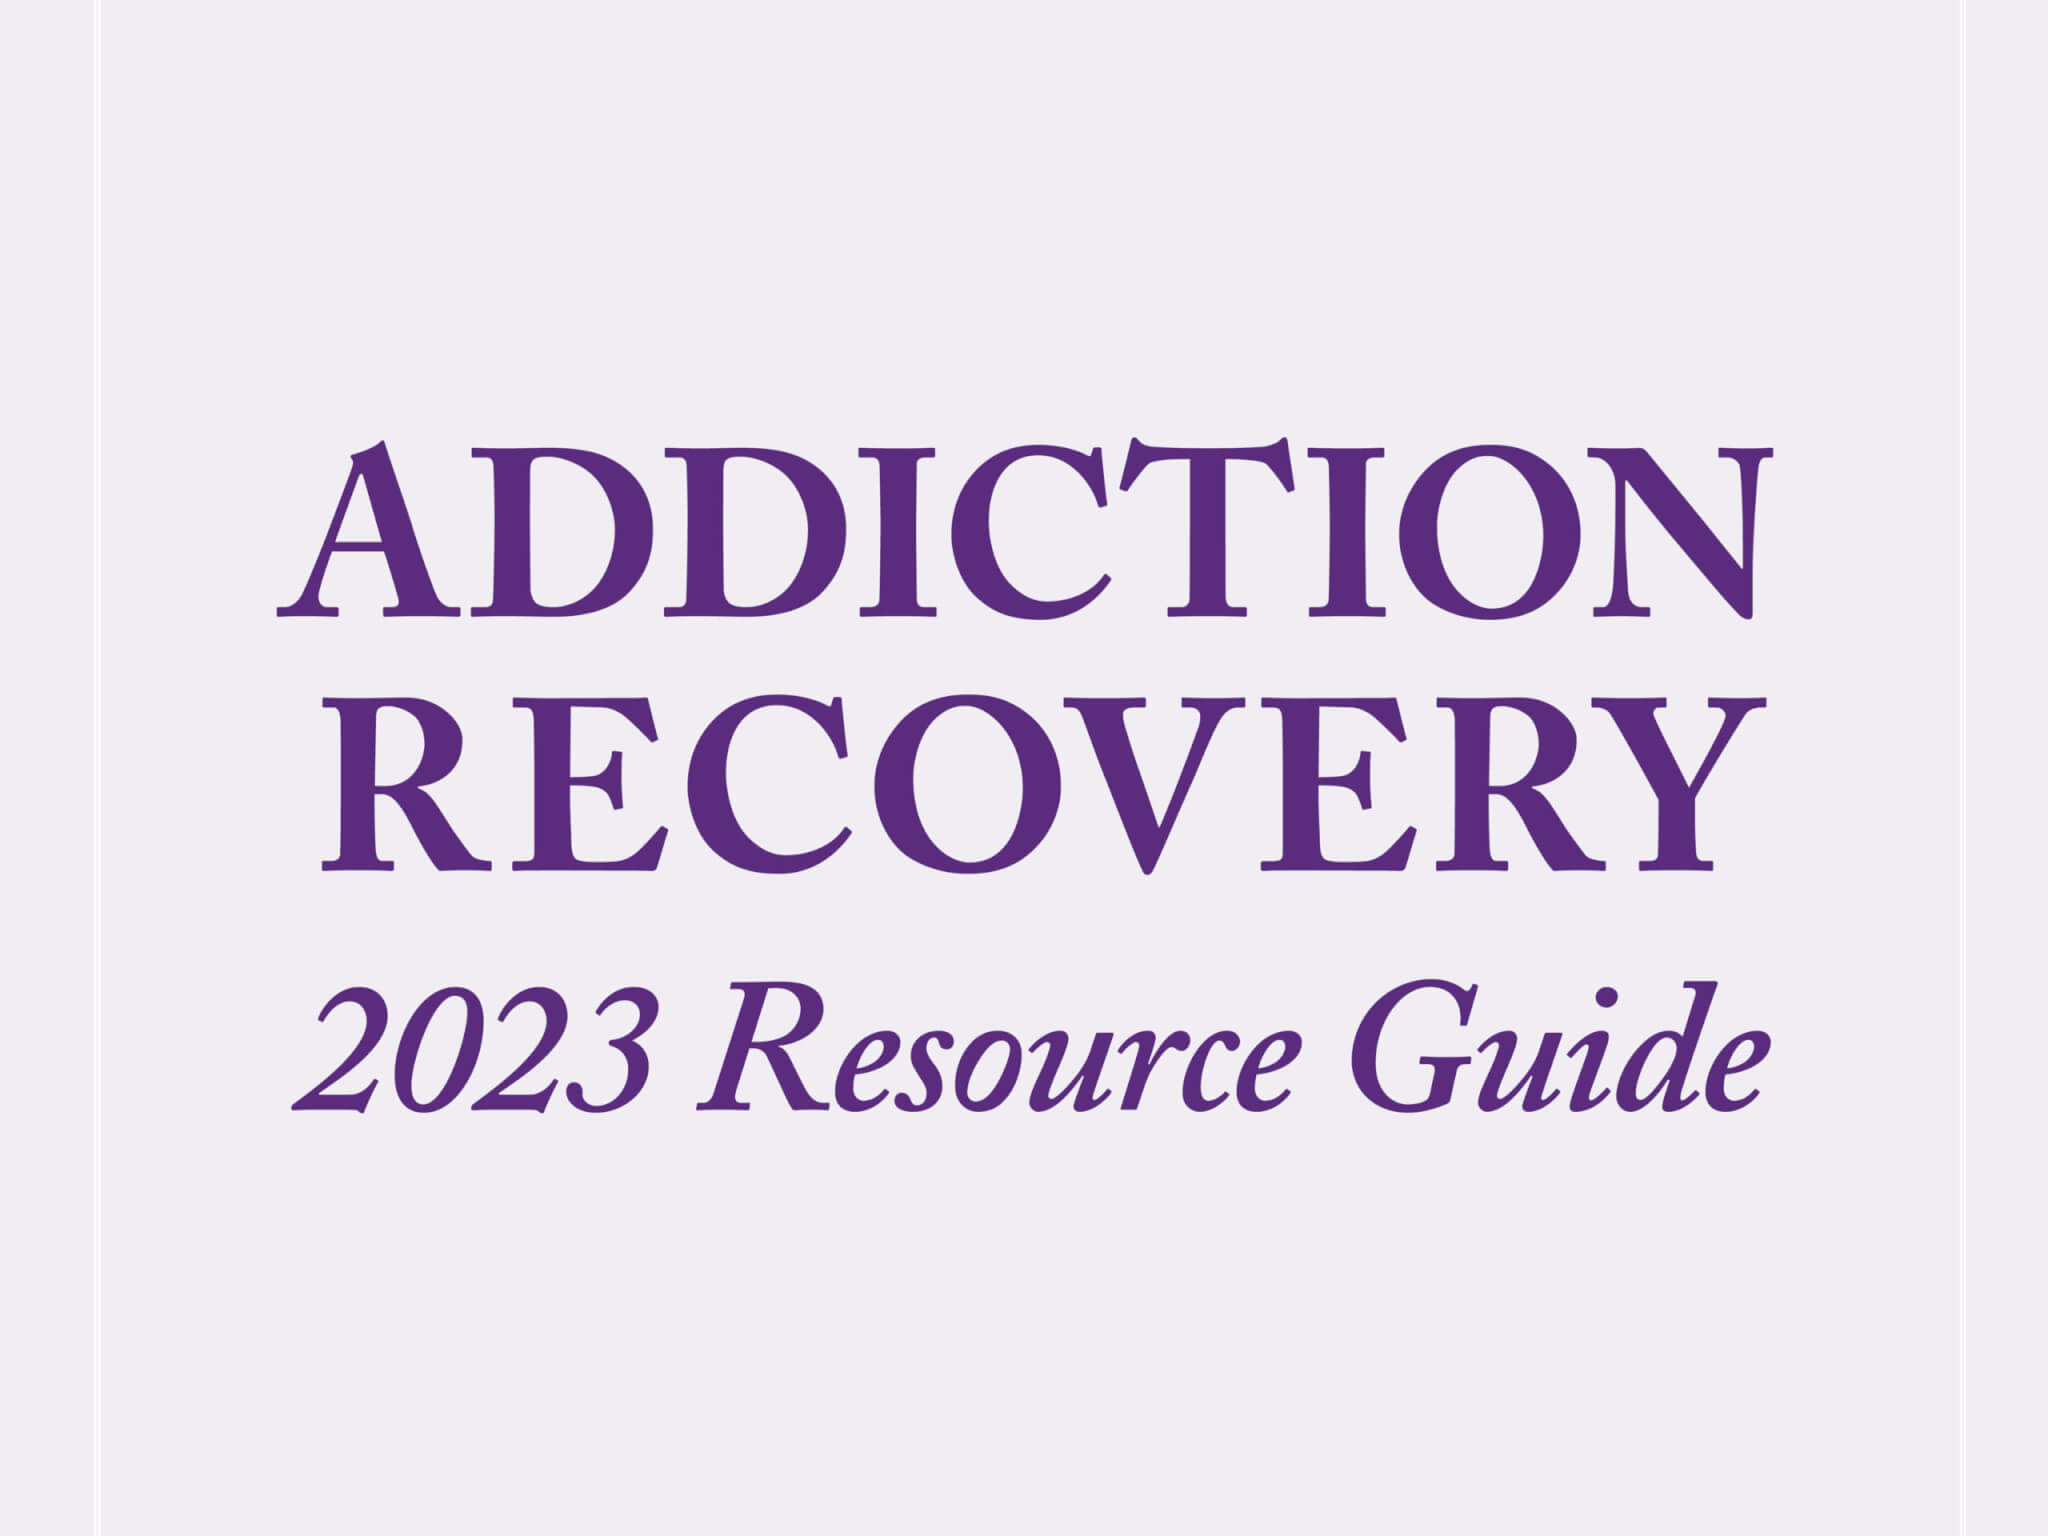 Recovery Local - Providing Addiction Resources And Information